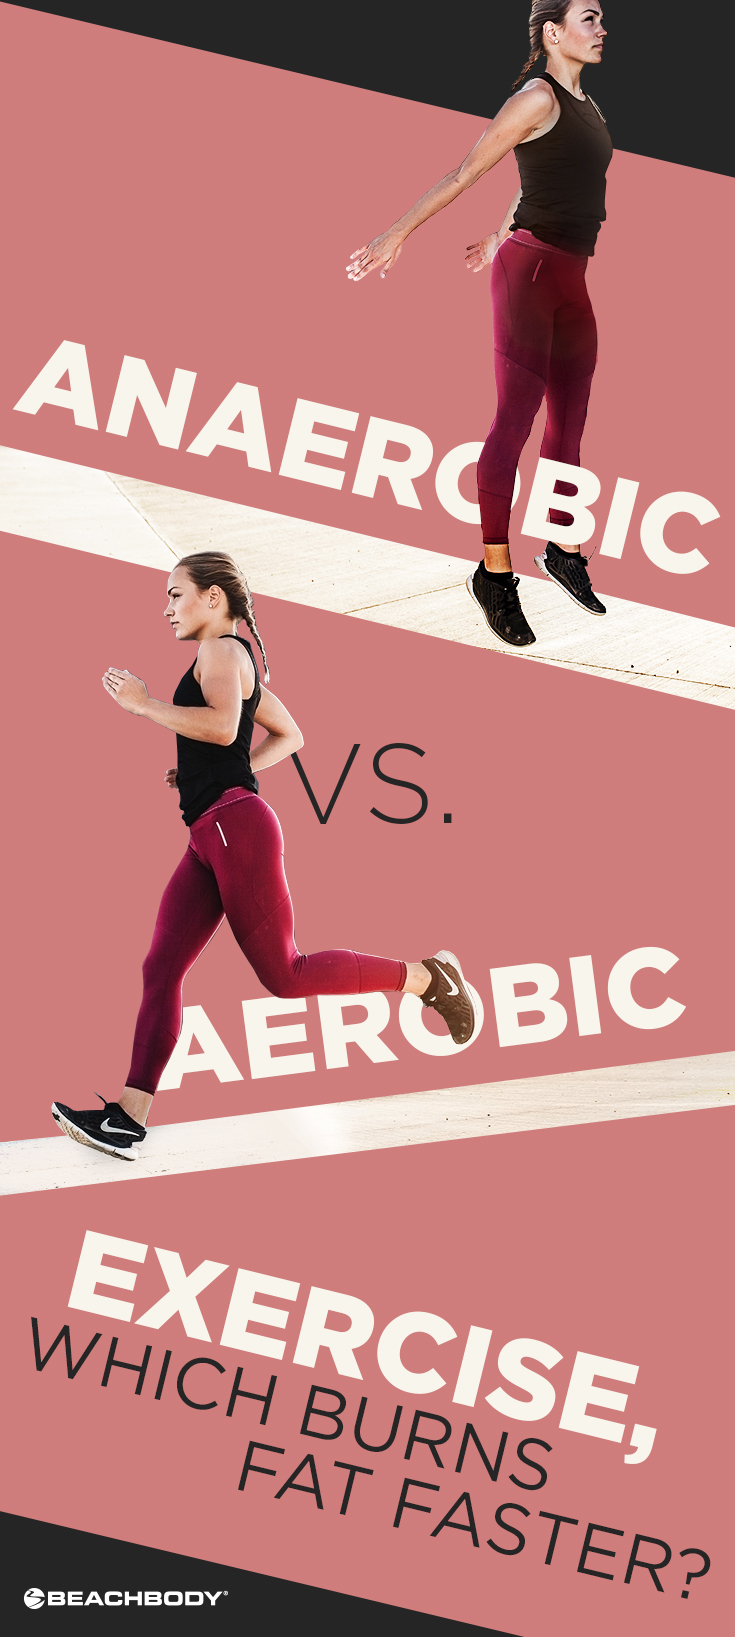 Anaerobic vs. Aerobic Exercise: Which Burns Fat Faster?